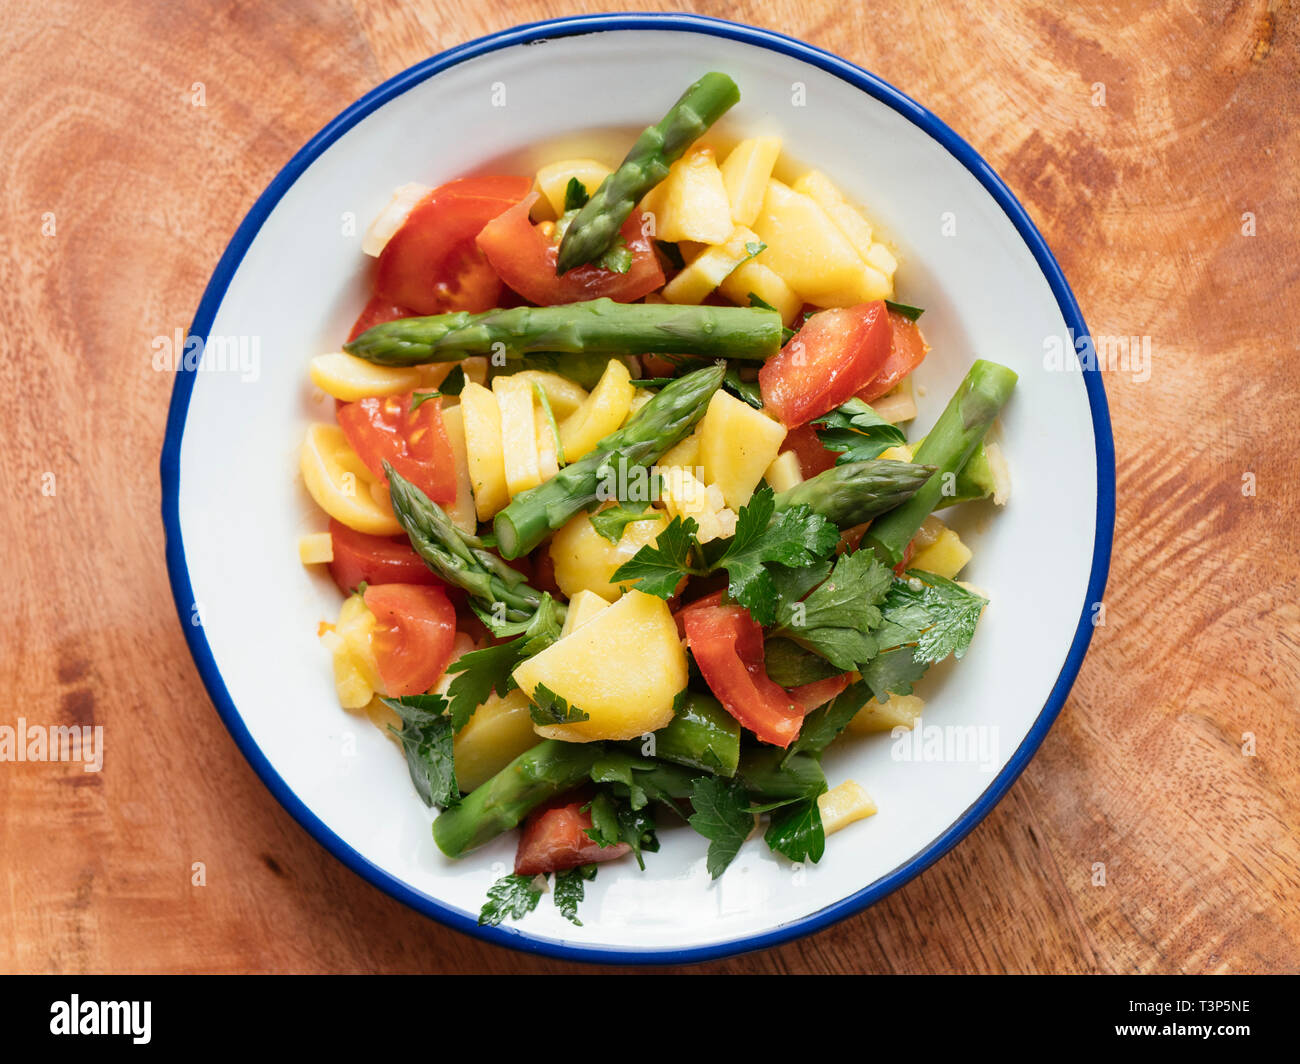 Potato Salad with Asparagus and Tomatoes Stock Photo